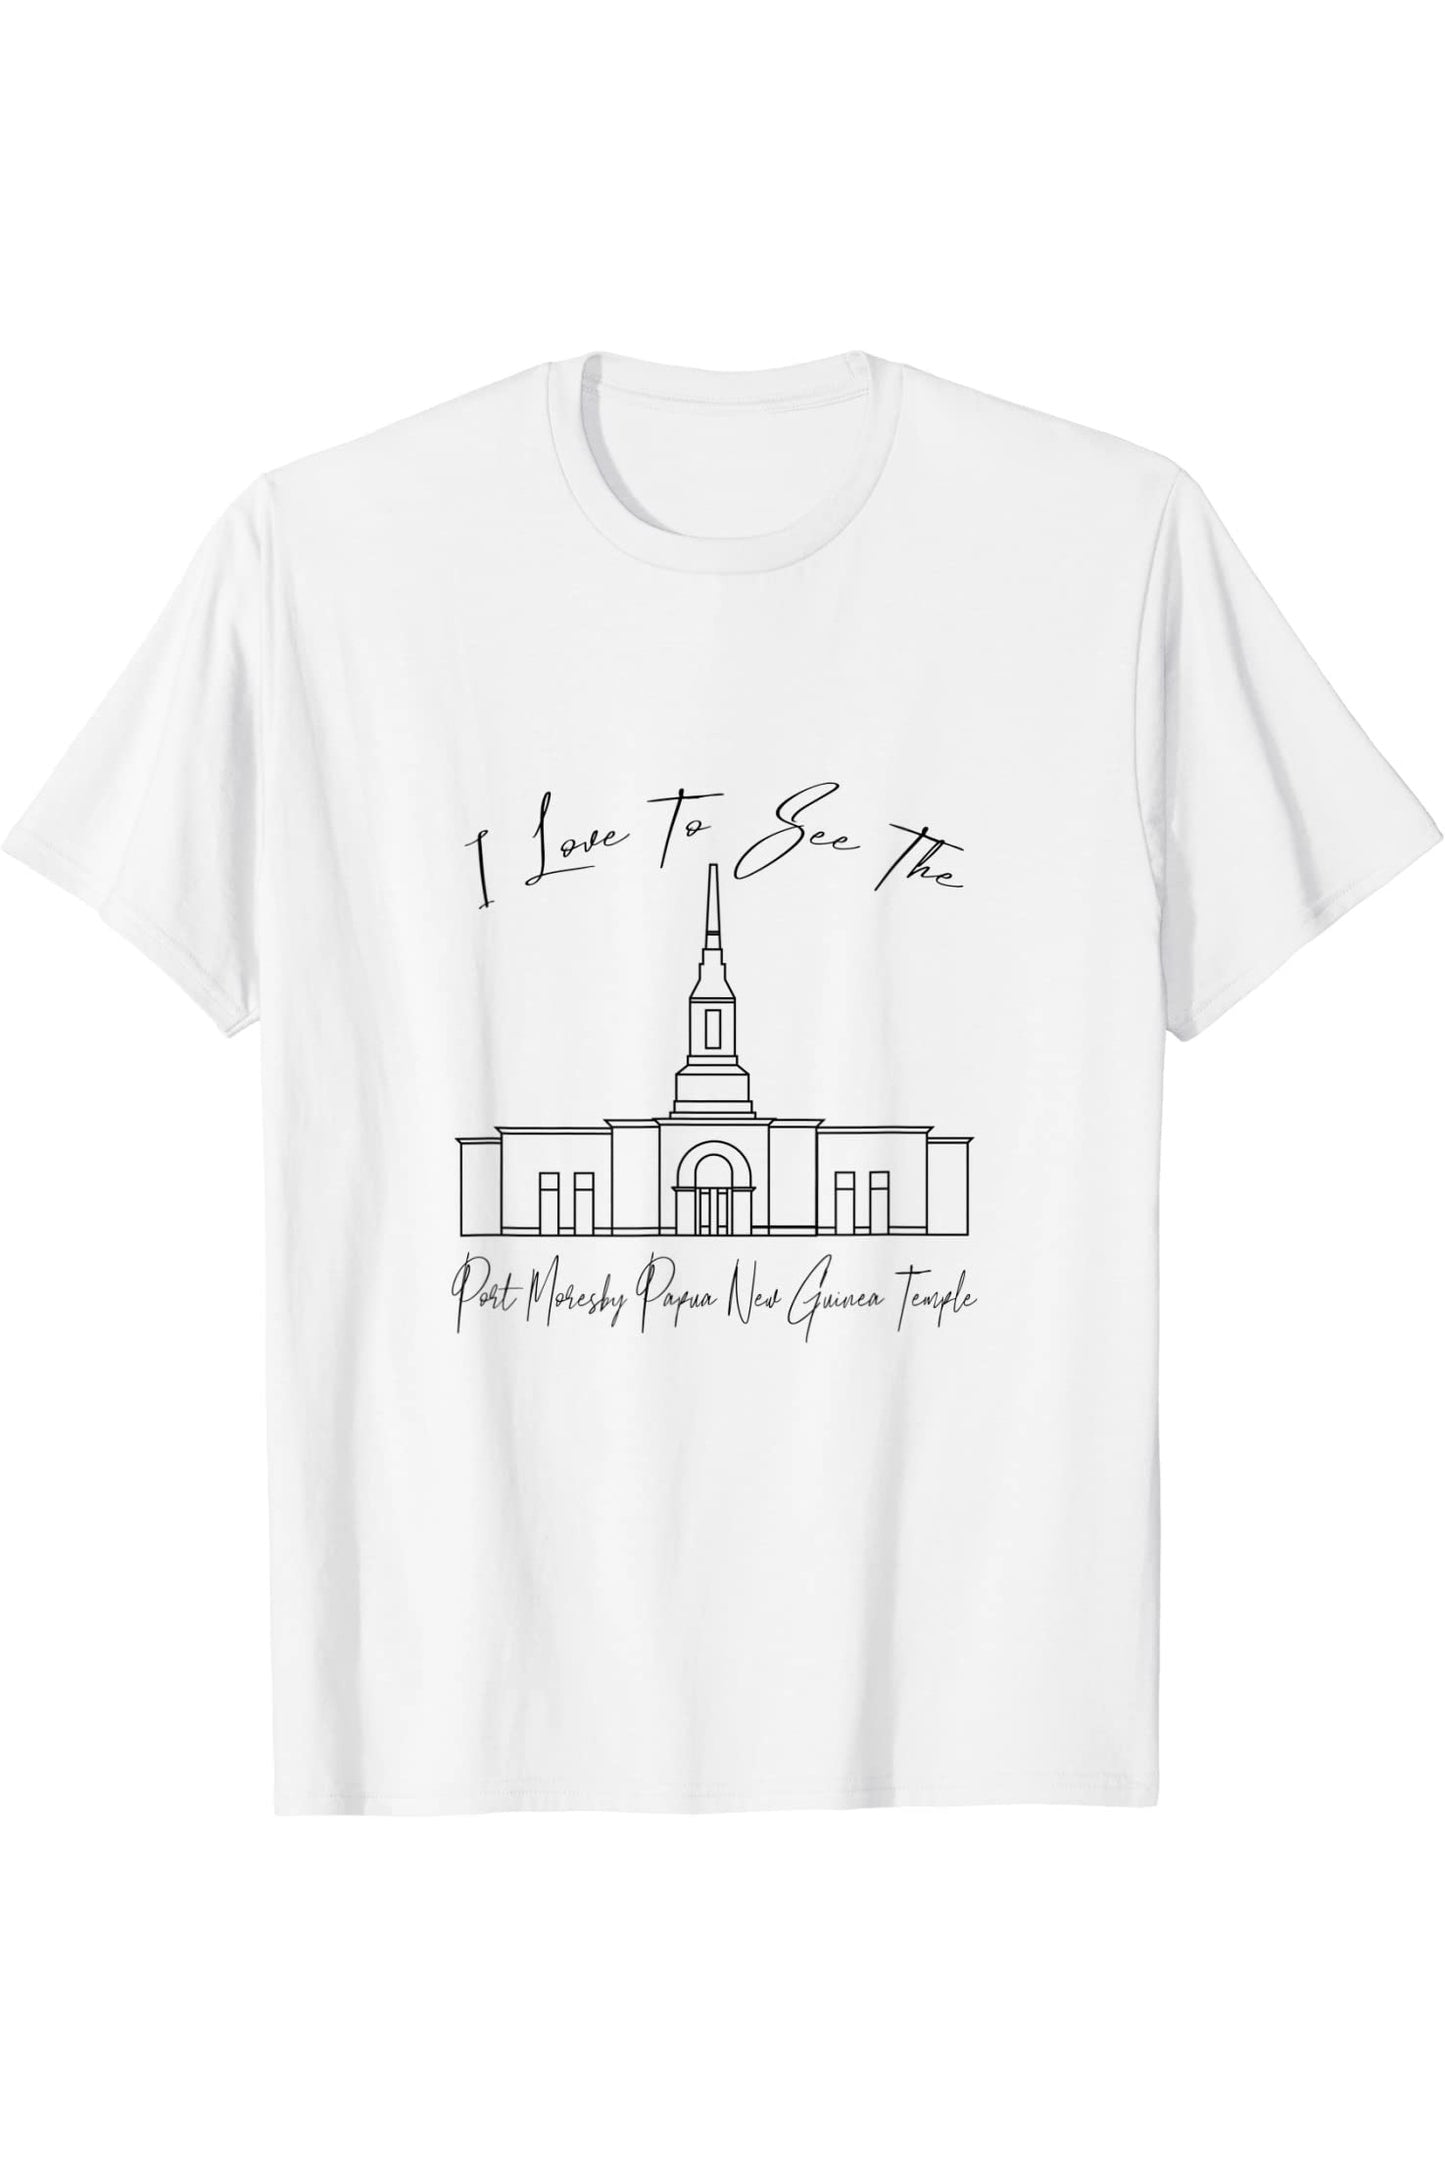 Port Moresby Papua New Guinea Temple T-Shirt - Calligraphy Style (English) US